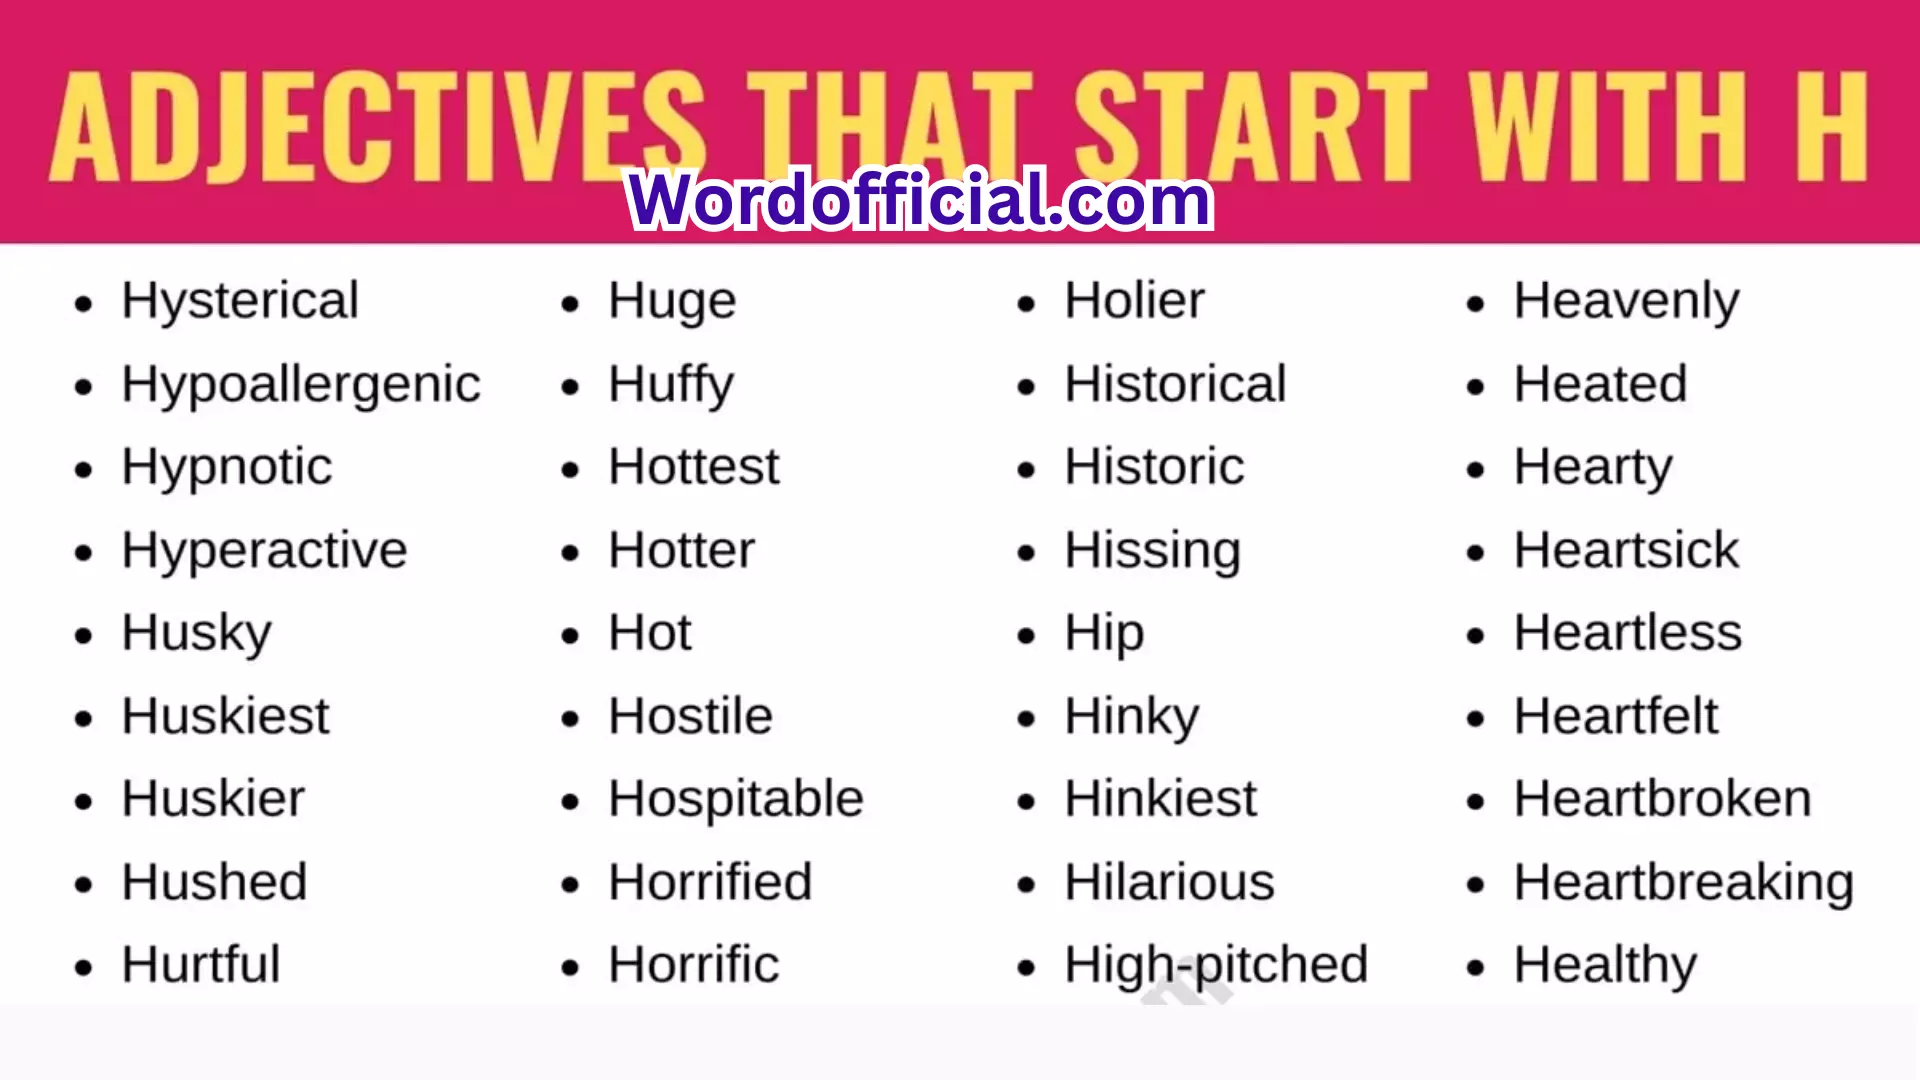  Adjectives That Start With H